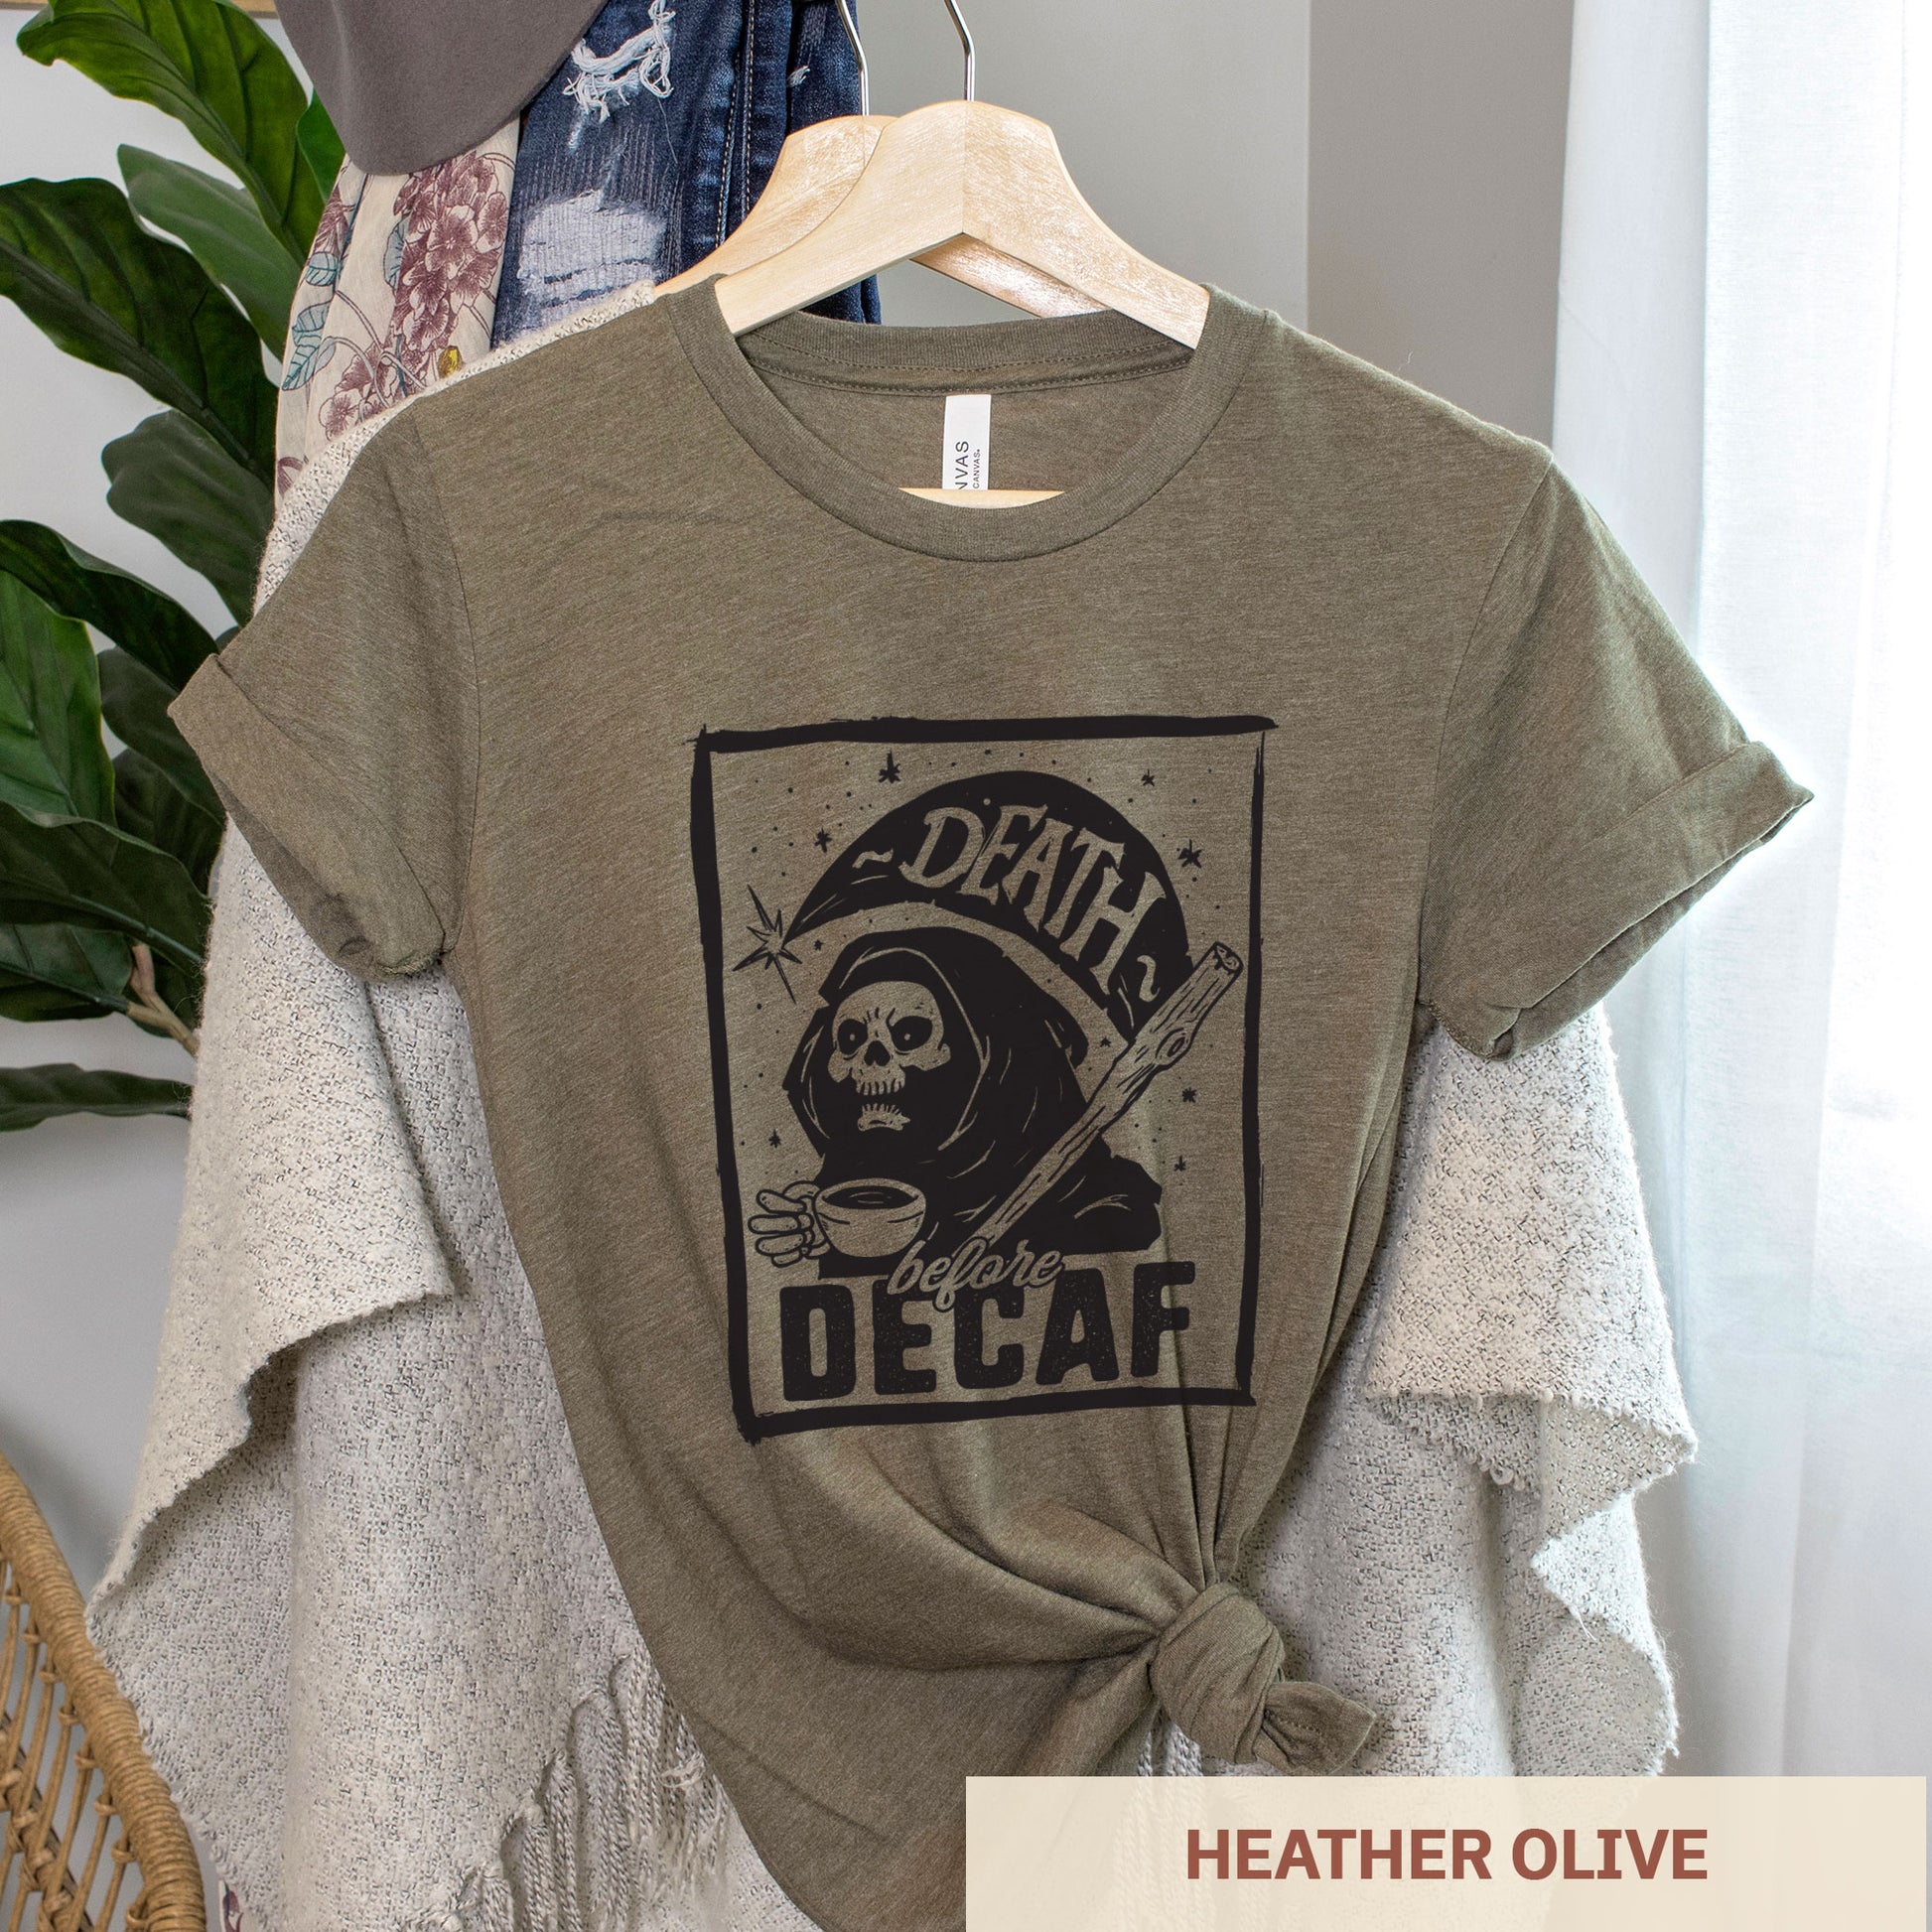 A hanging heather olive Bella Canvas t-shirt featuring the grim reaper drinking a cup of coffee with the words Death before decaf